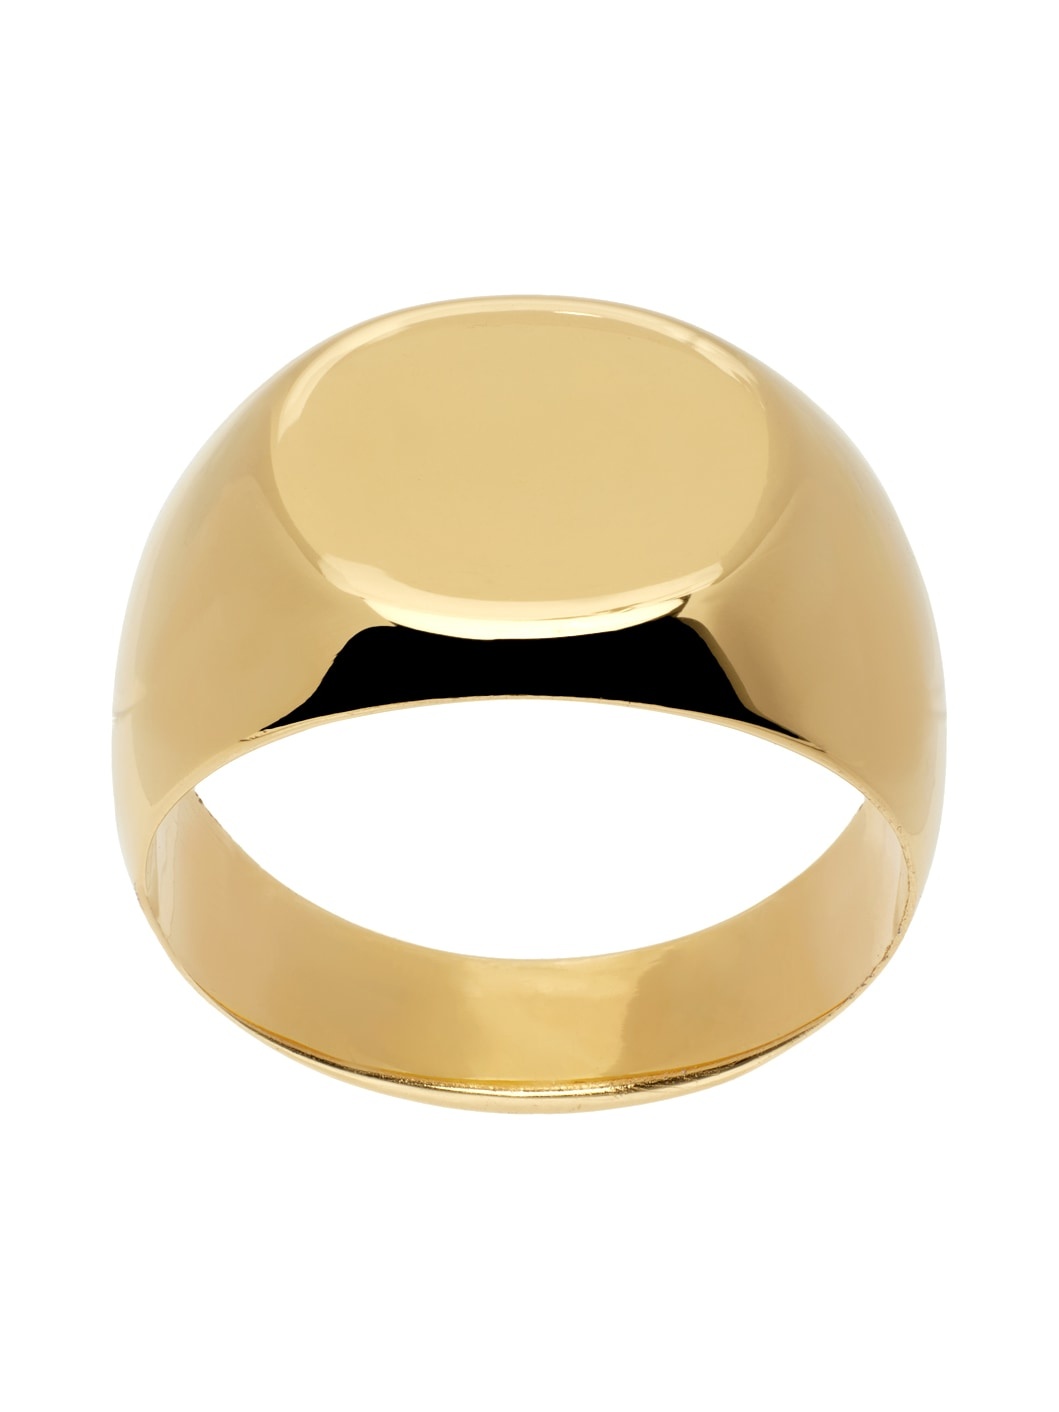 Gold Classic Chevalier Ring - 1